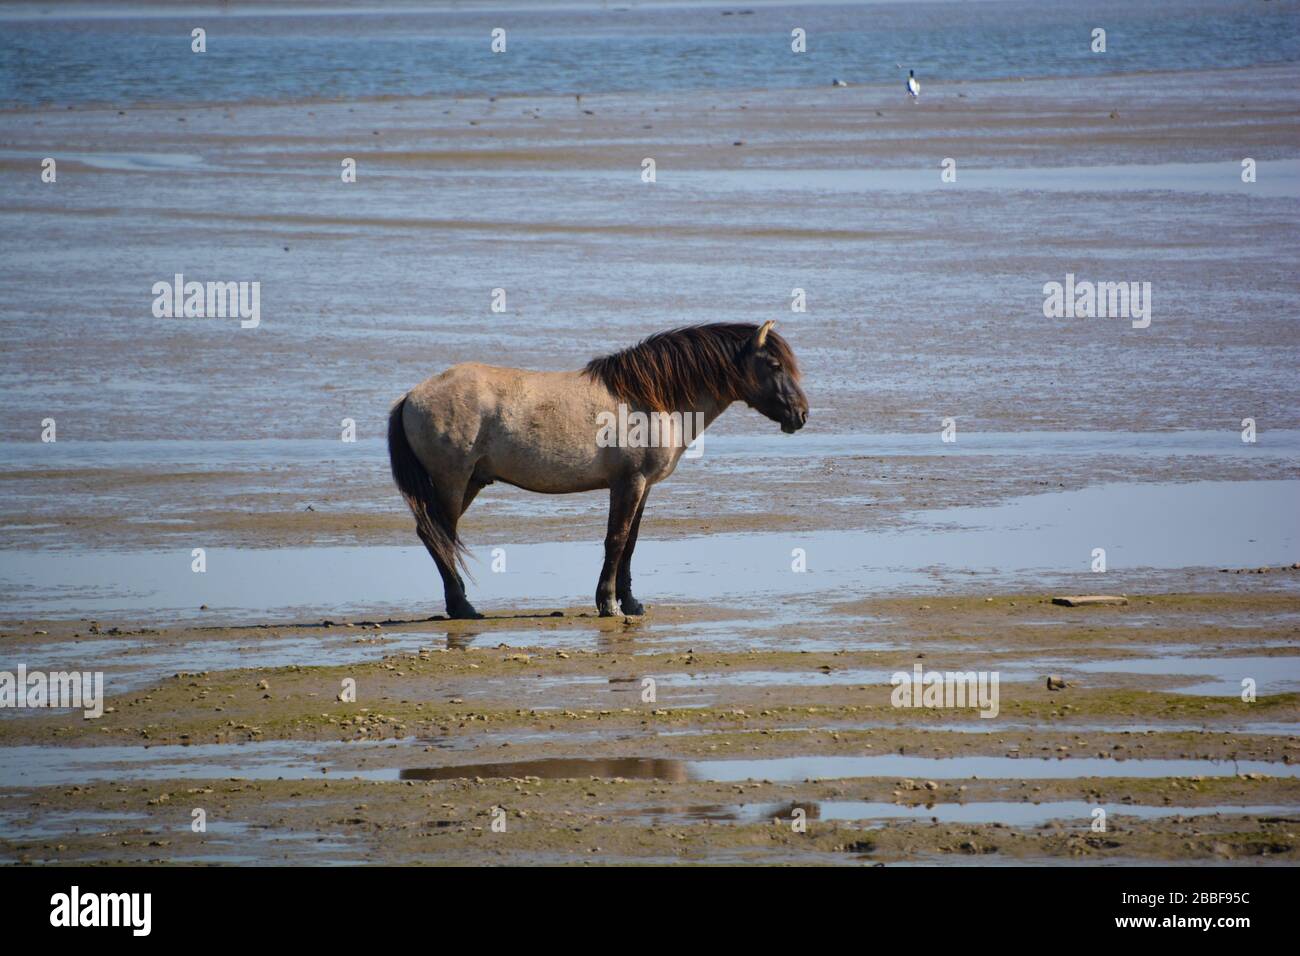 One of the wild horses standing in the wetlands in Biesbosch National Park; one of the last extensive areas of freshwater tidal wetlands in Northweste Stock Photo